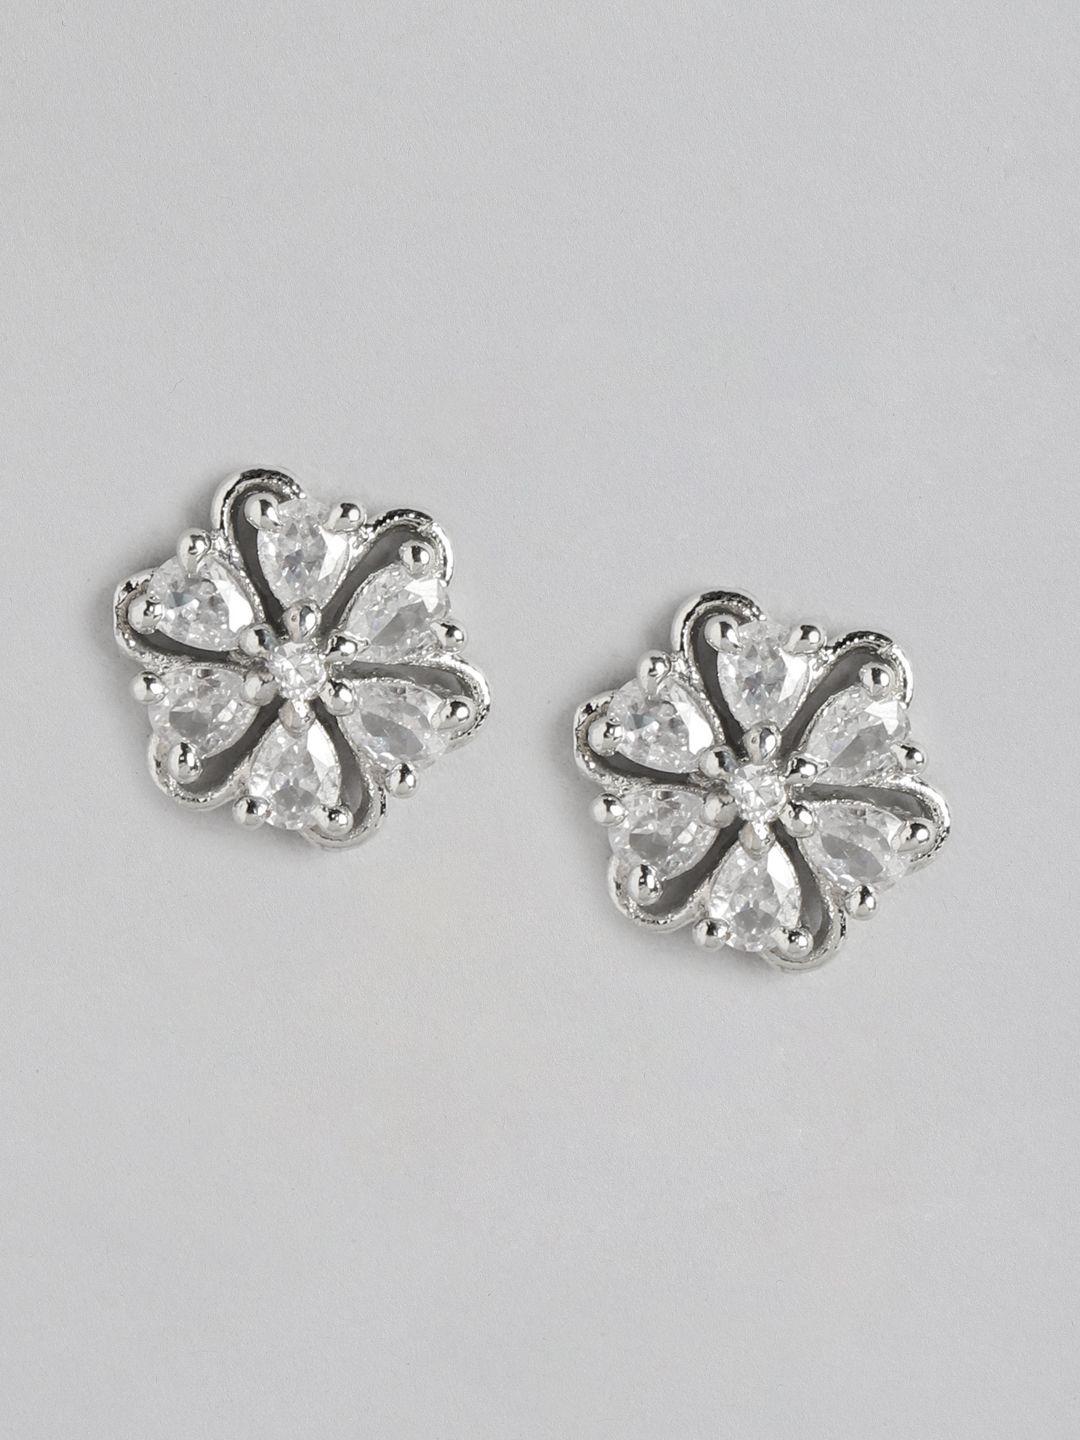 aadvik designs silver-plated ad studded floral studs earrings